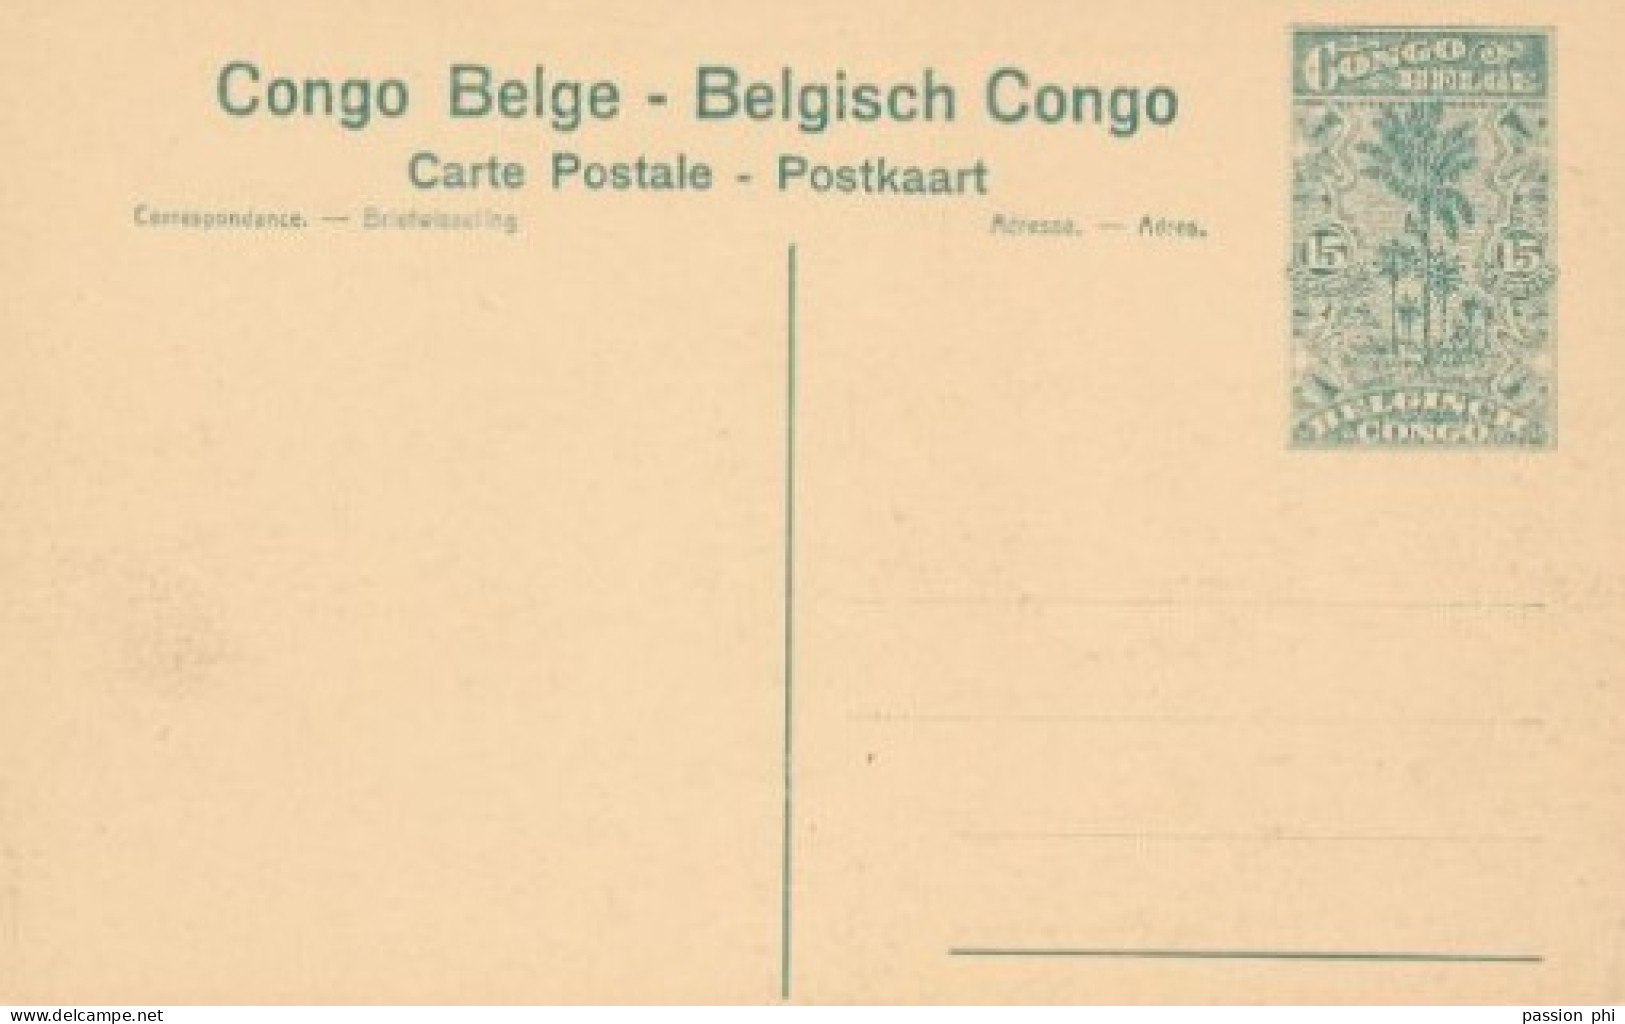 BELGIAN CONGO PPS SBEP 61 VIEW 115 UNUSED - Stamped Stationery